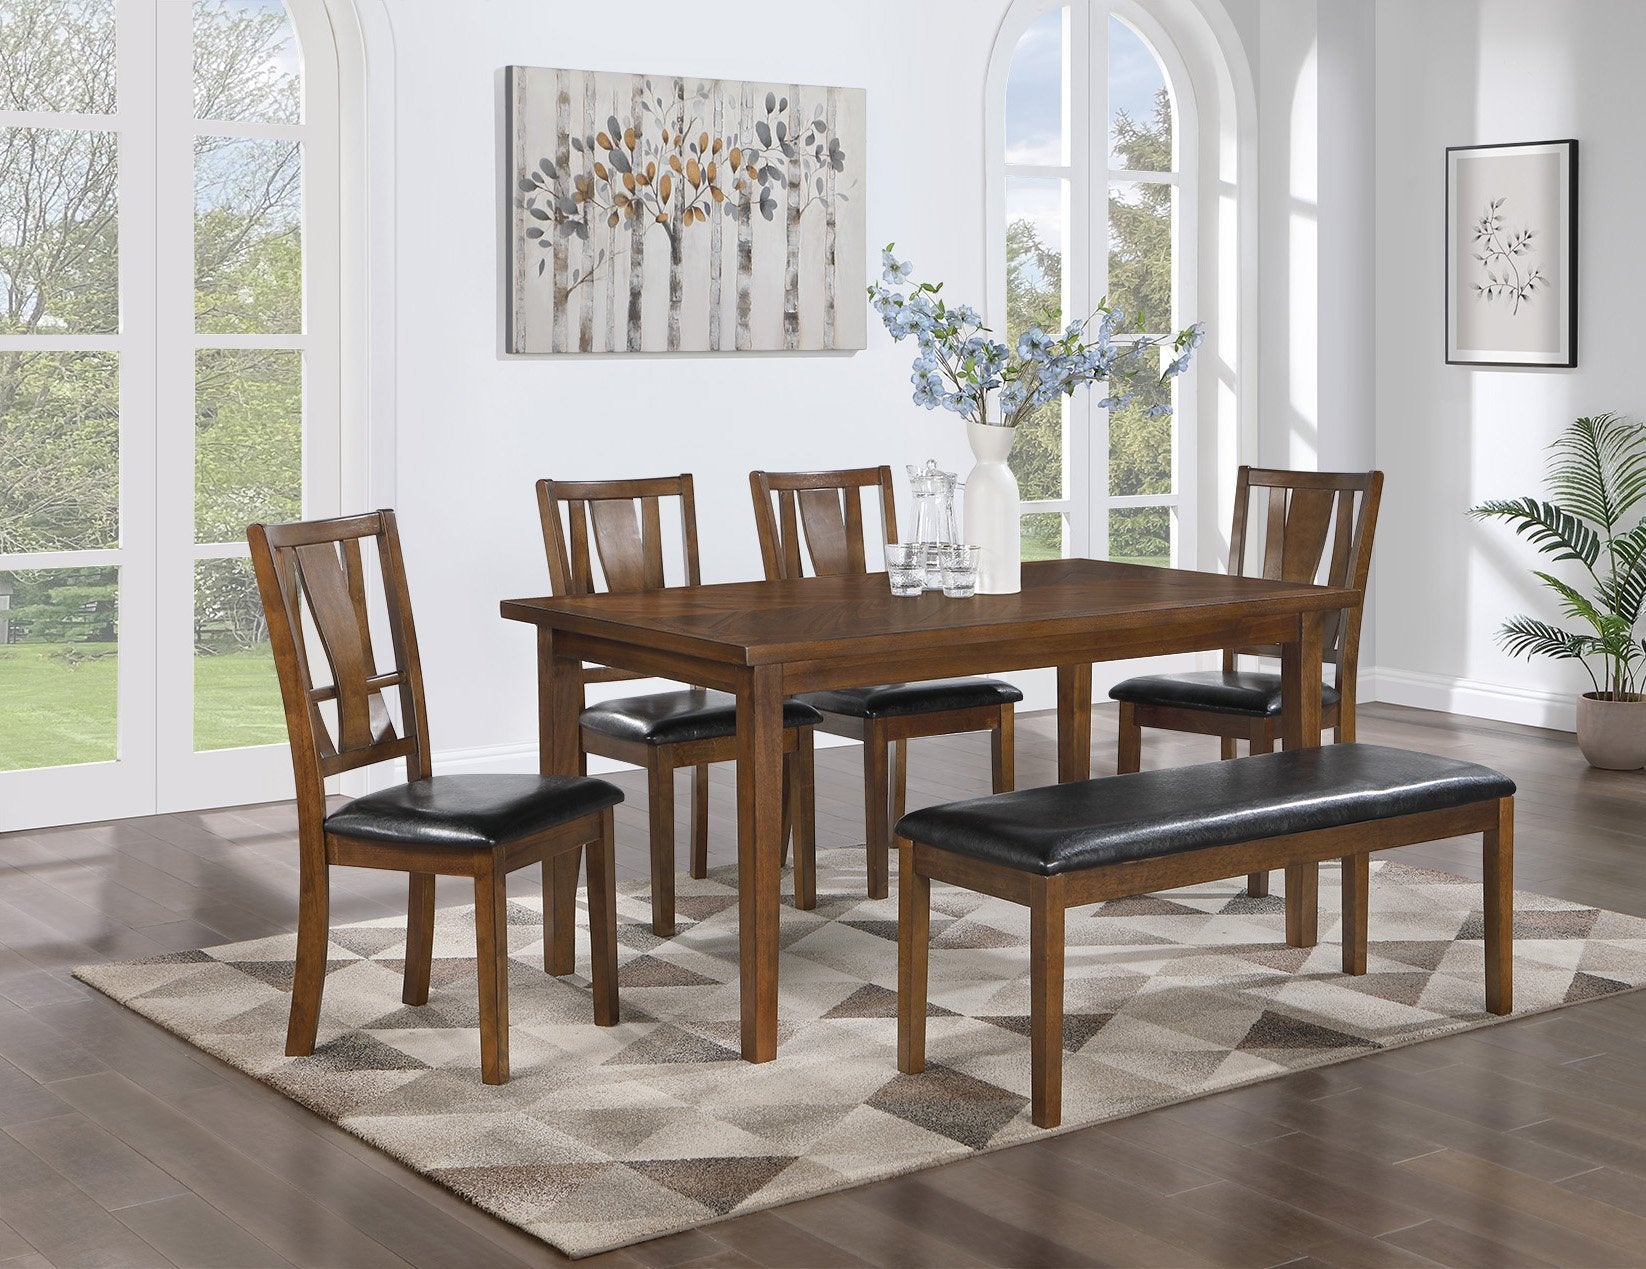 6 Piece Dining Set with Bench, Brown Cherry